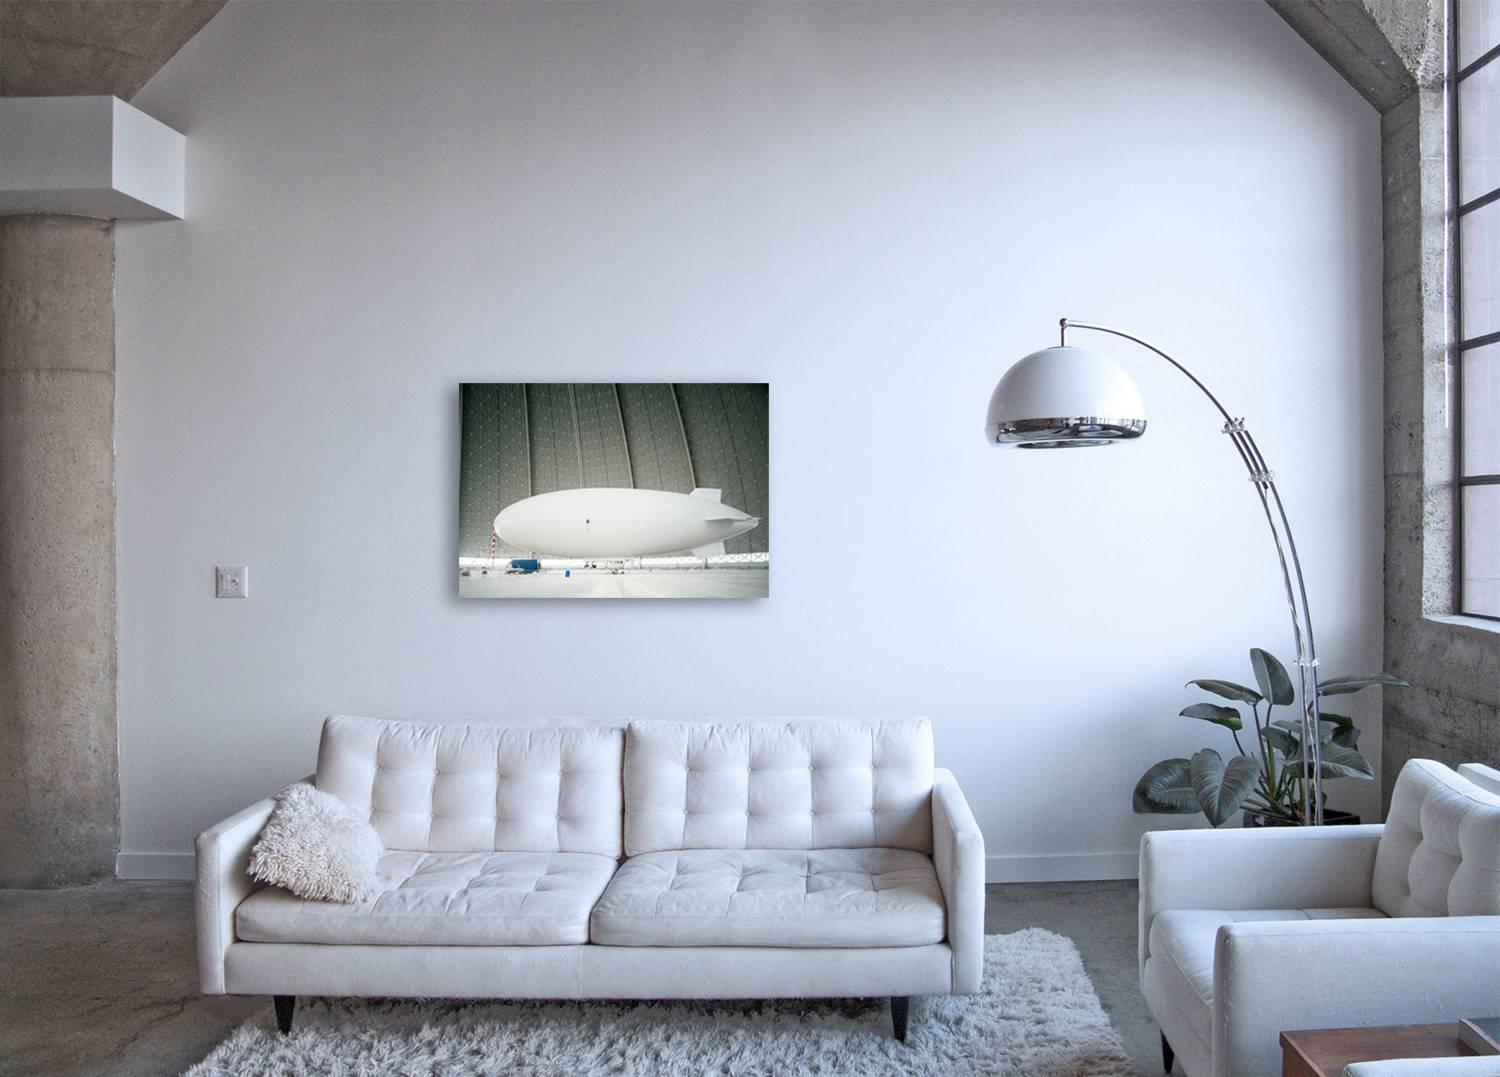 Zeppelin - large format photograph of iconic white airship - Photograph by Christian Stoll